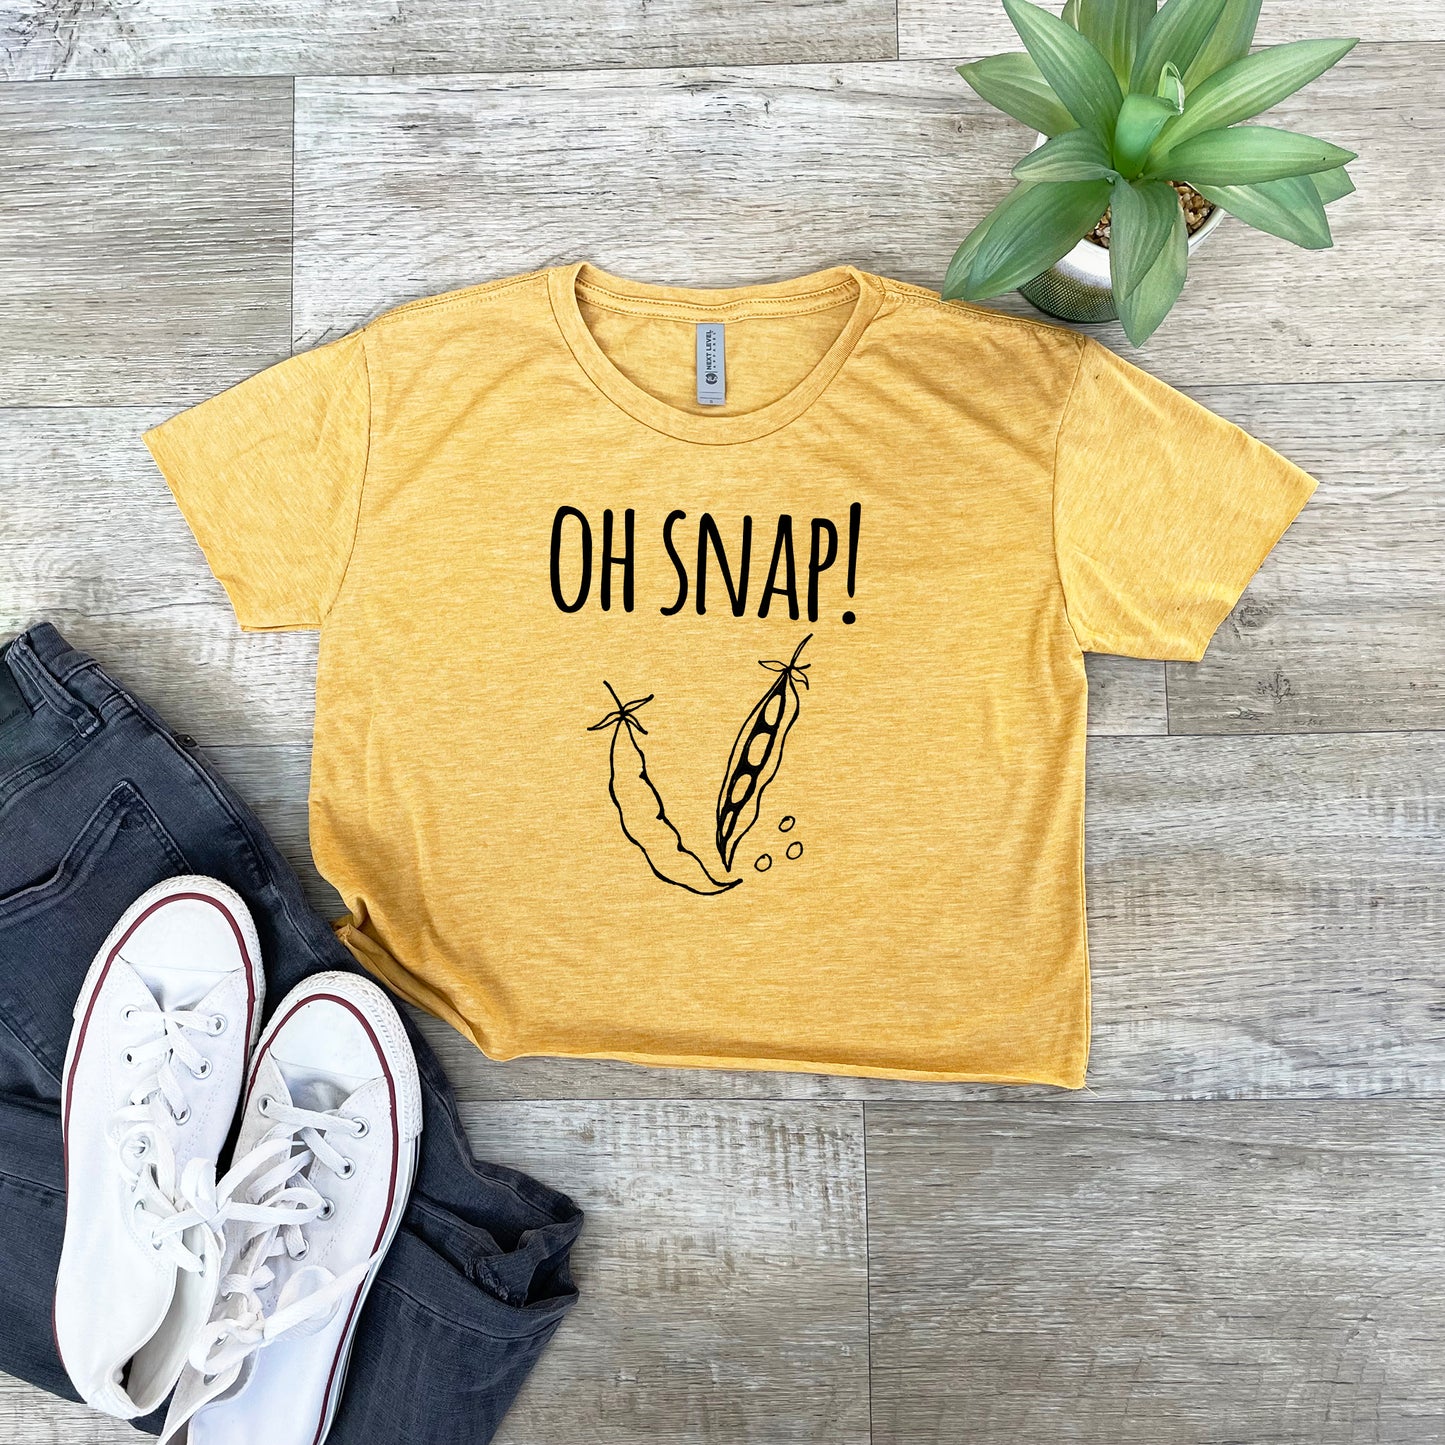 Oh Snap (Peas) - Women's Crop Tee - Heather Gray or Gold